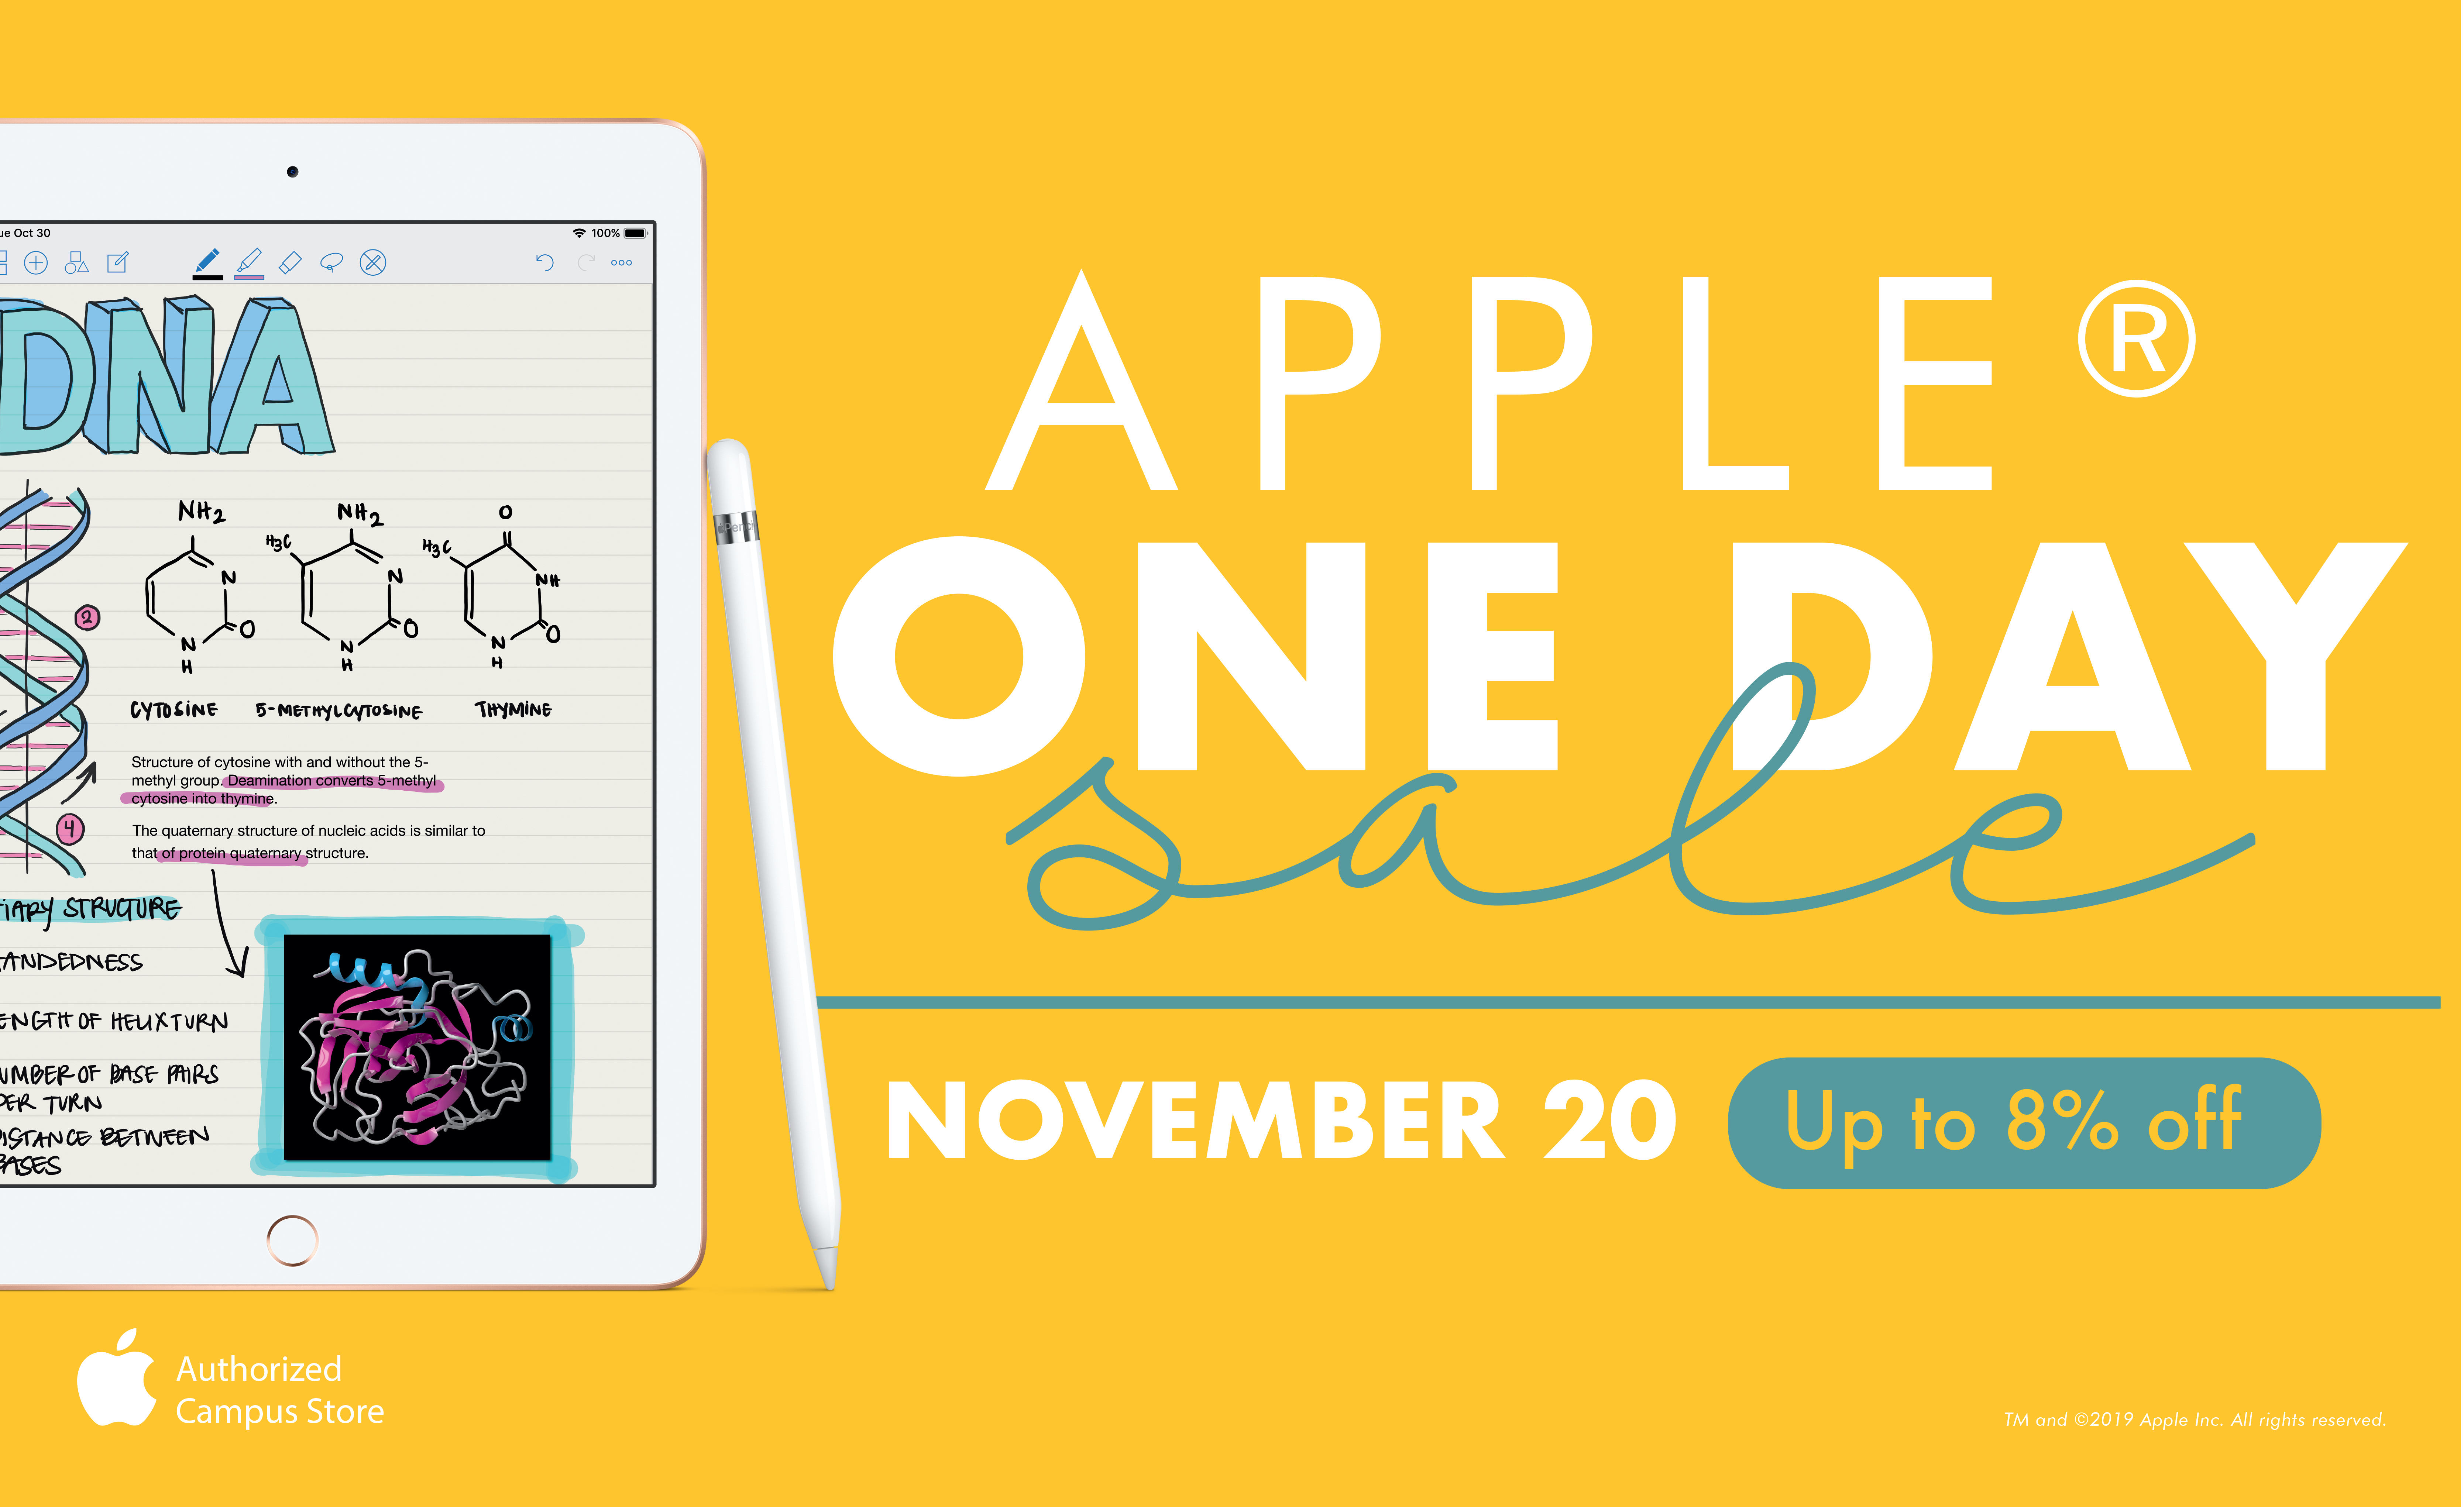 Apple One Day Sale. Nov 20th. Up to 8% off.